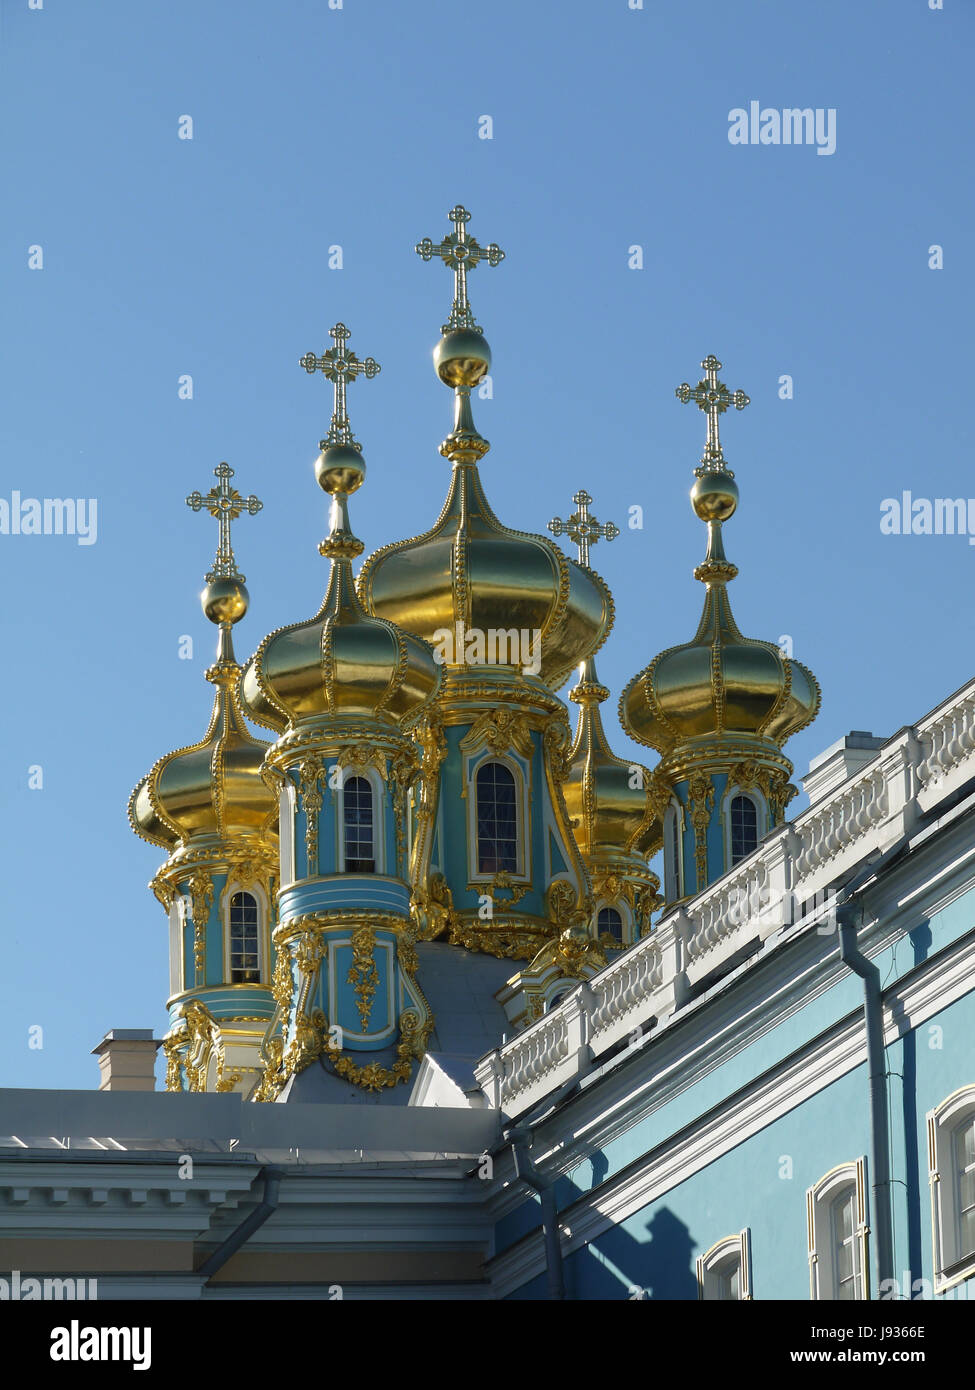 russia, russian, sightseeing, gilt, hall, pageantry, style of construction, Stock Photo